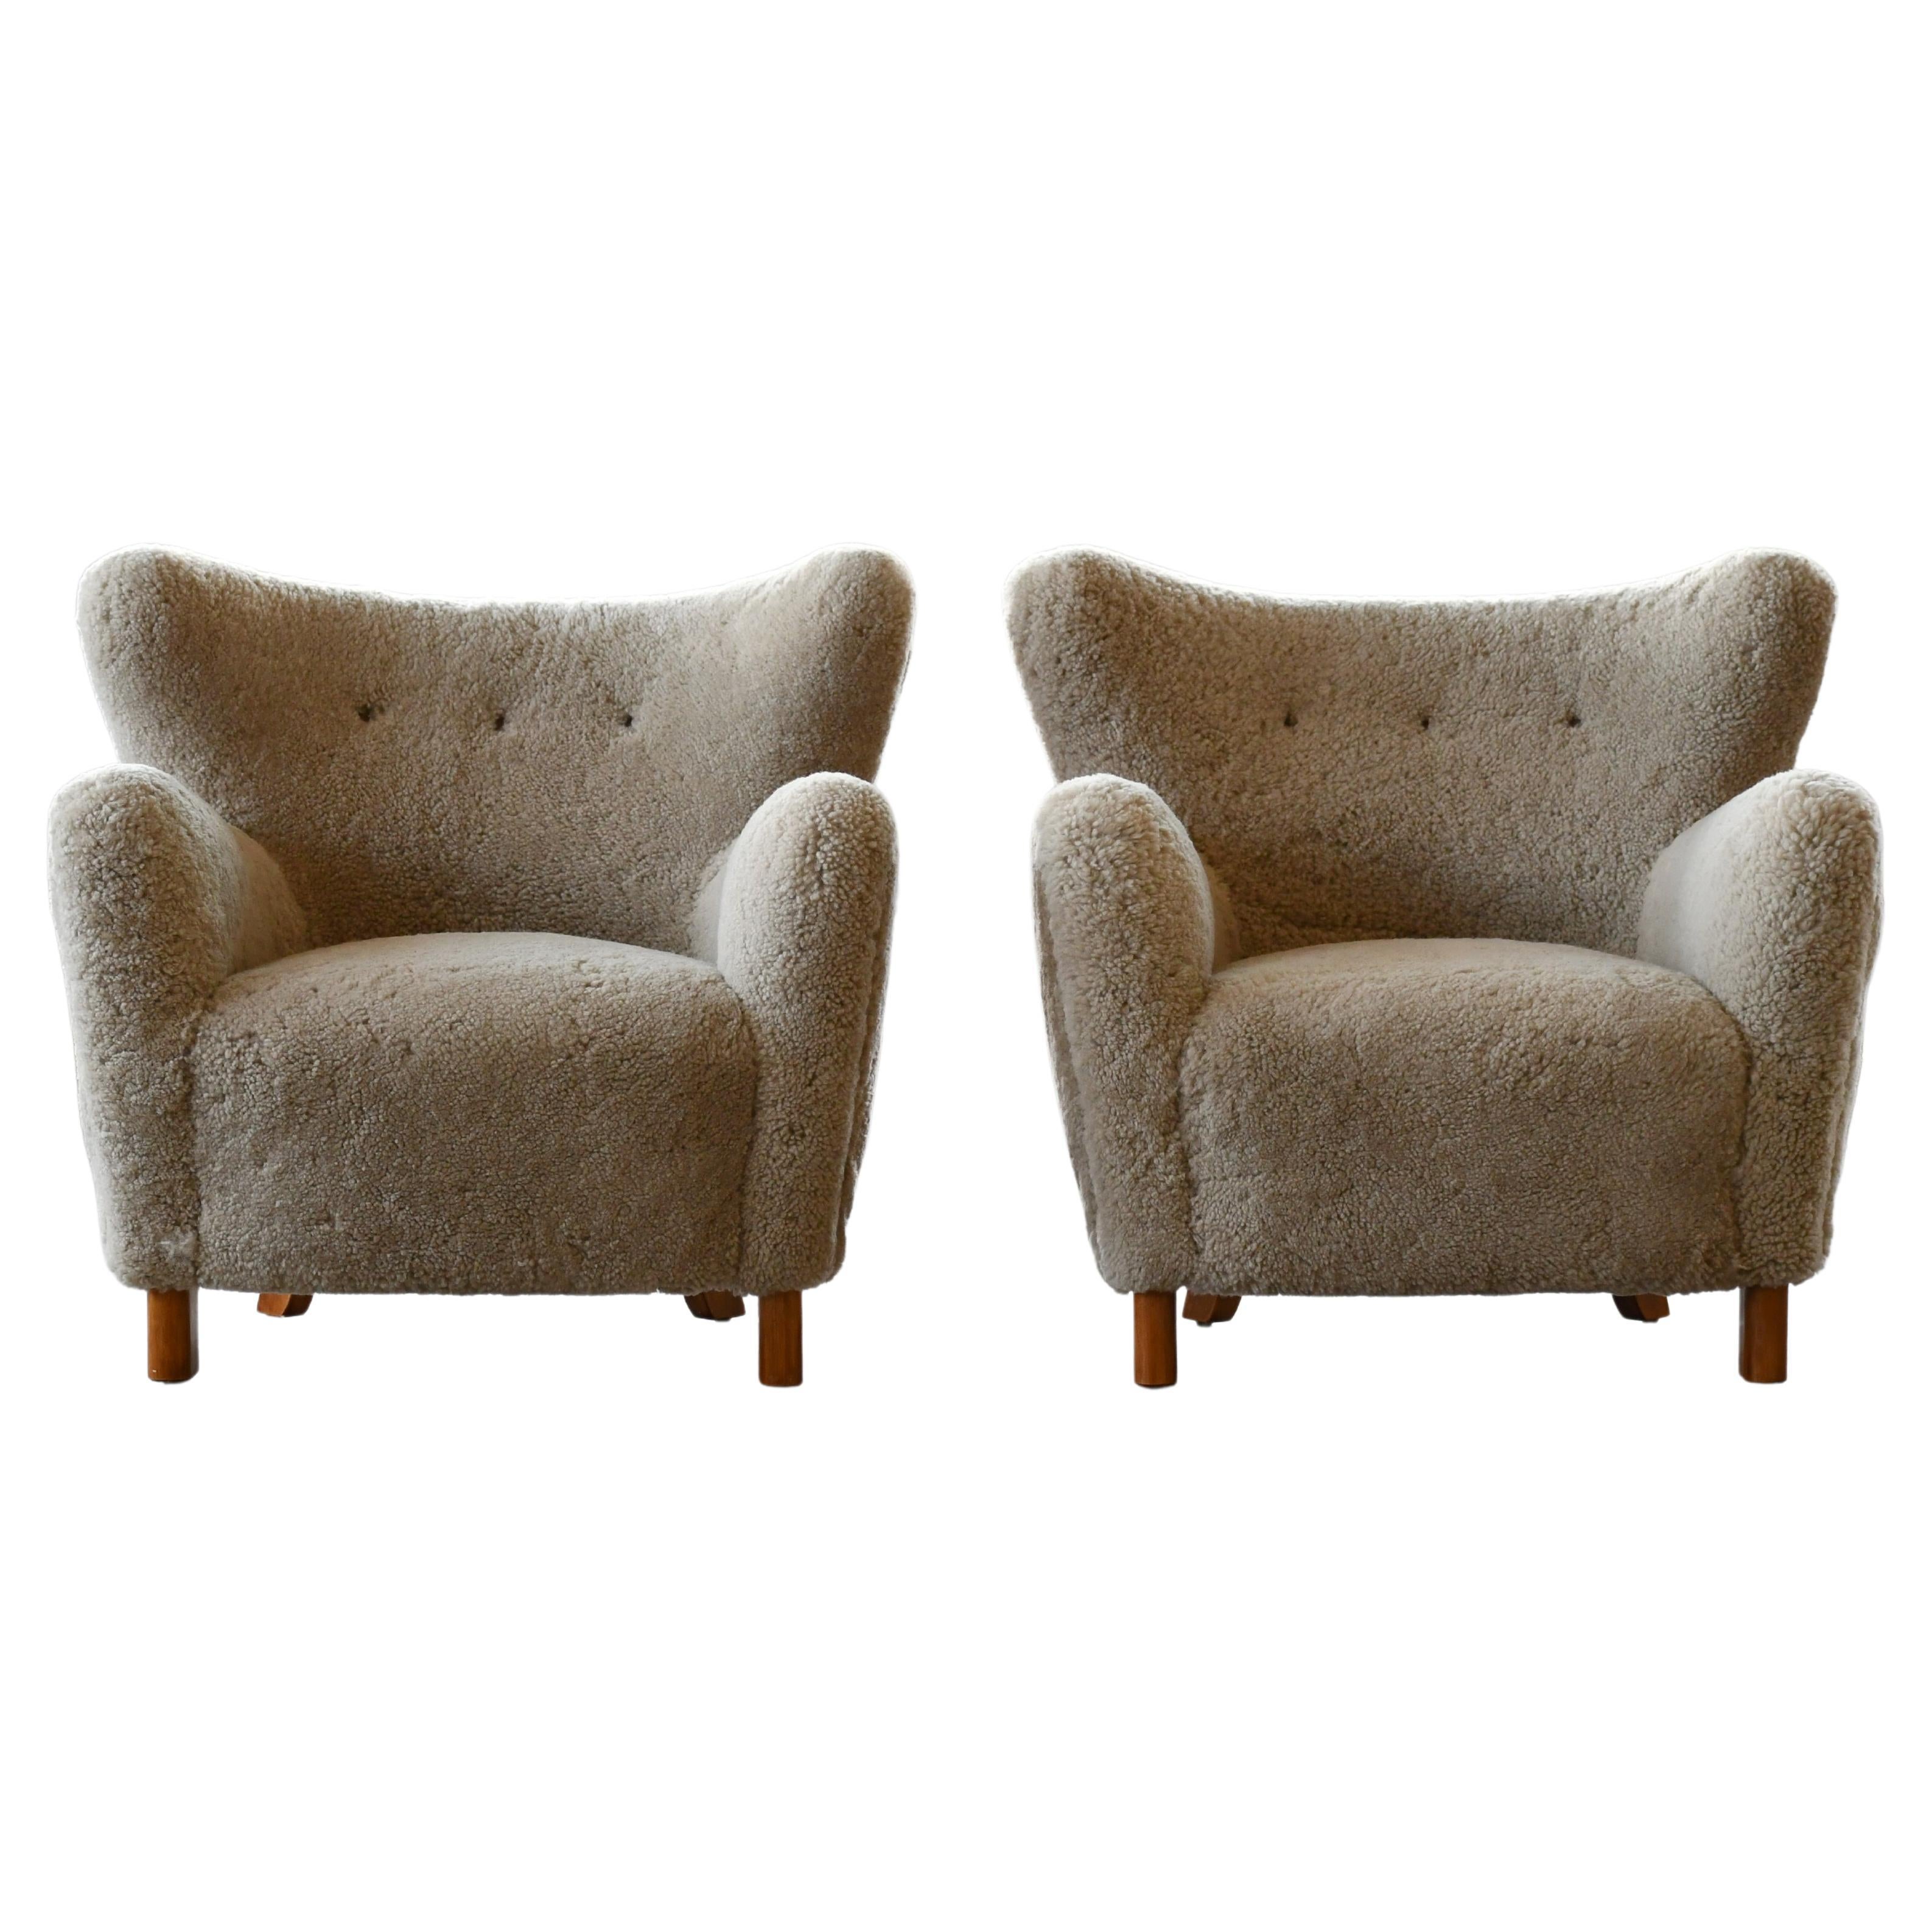 Pair of 1940's Style Classic Club or Lounge Chairs in Grey Shearling For Sale